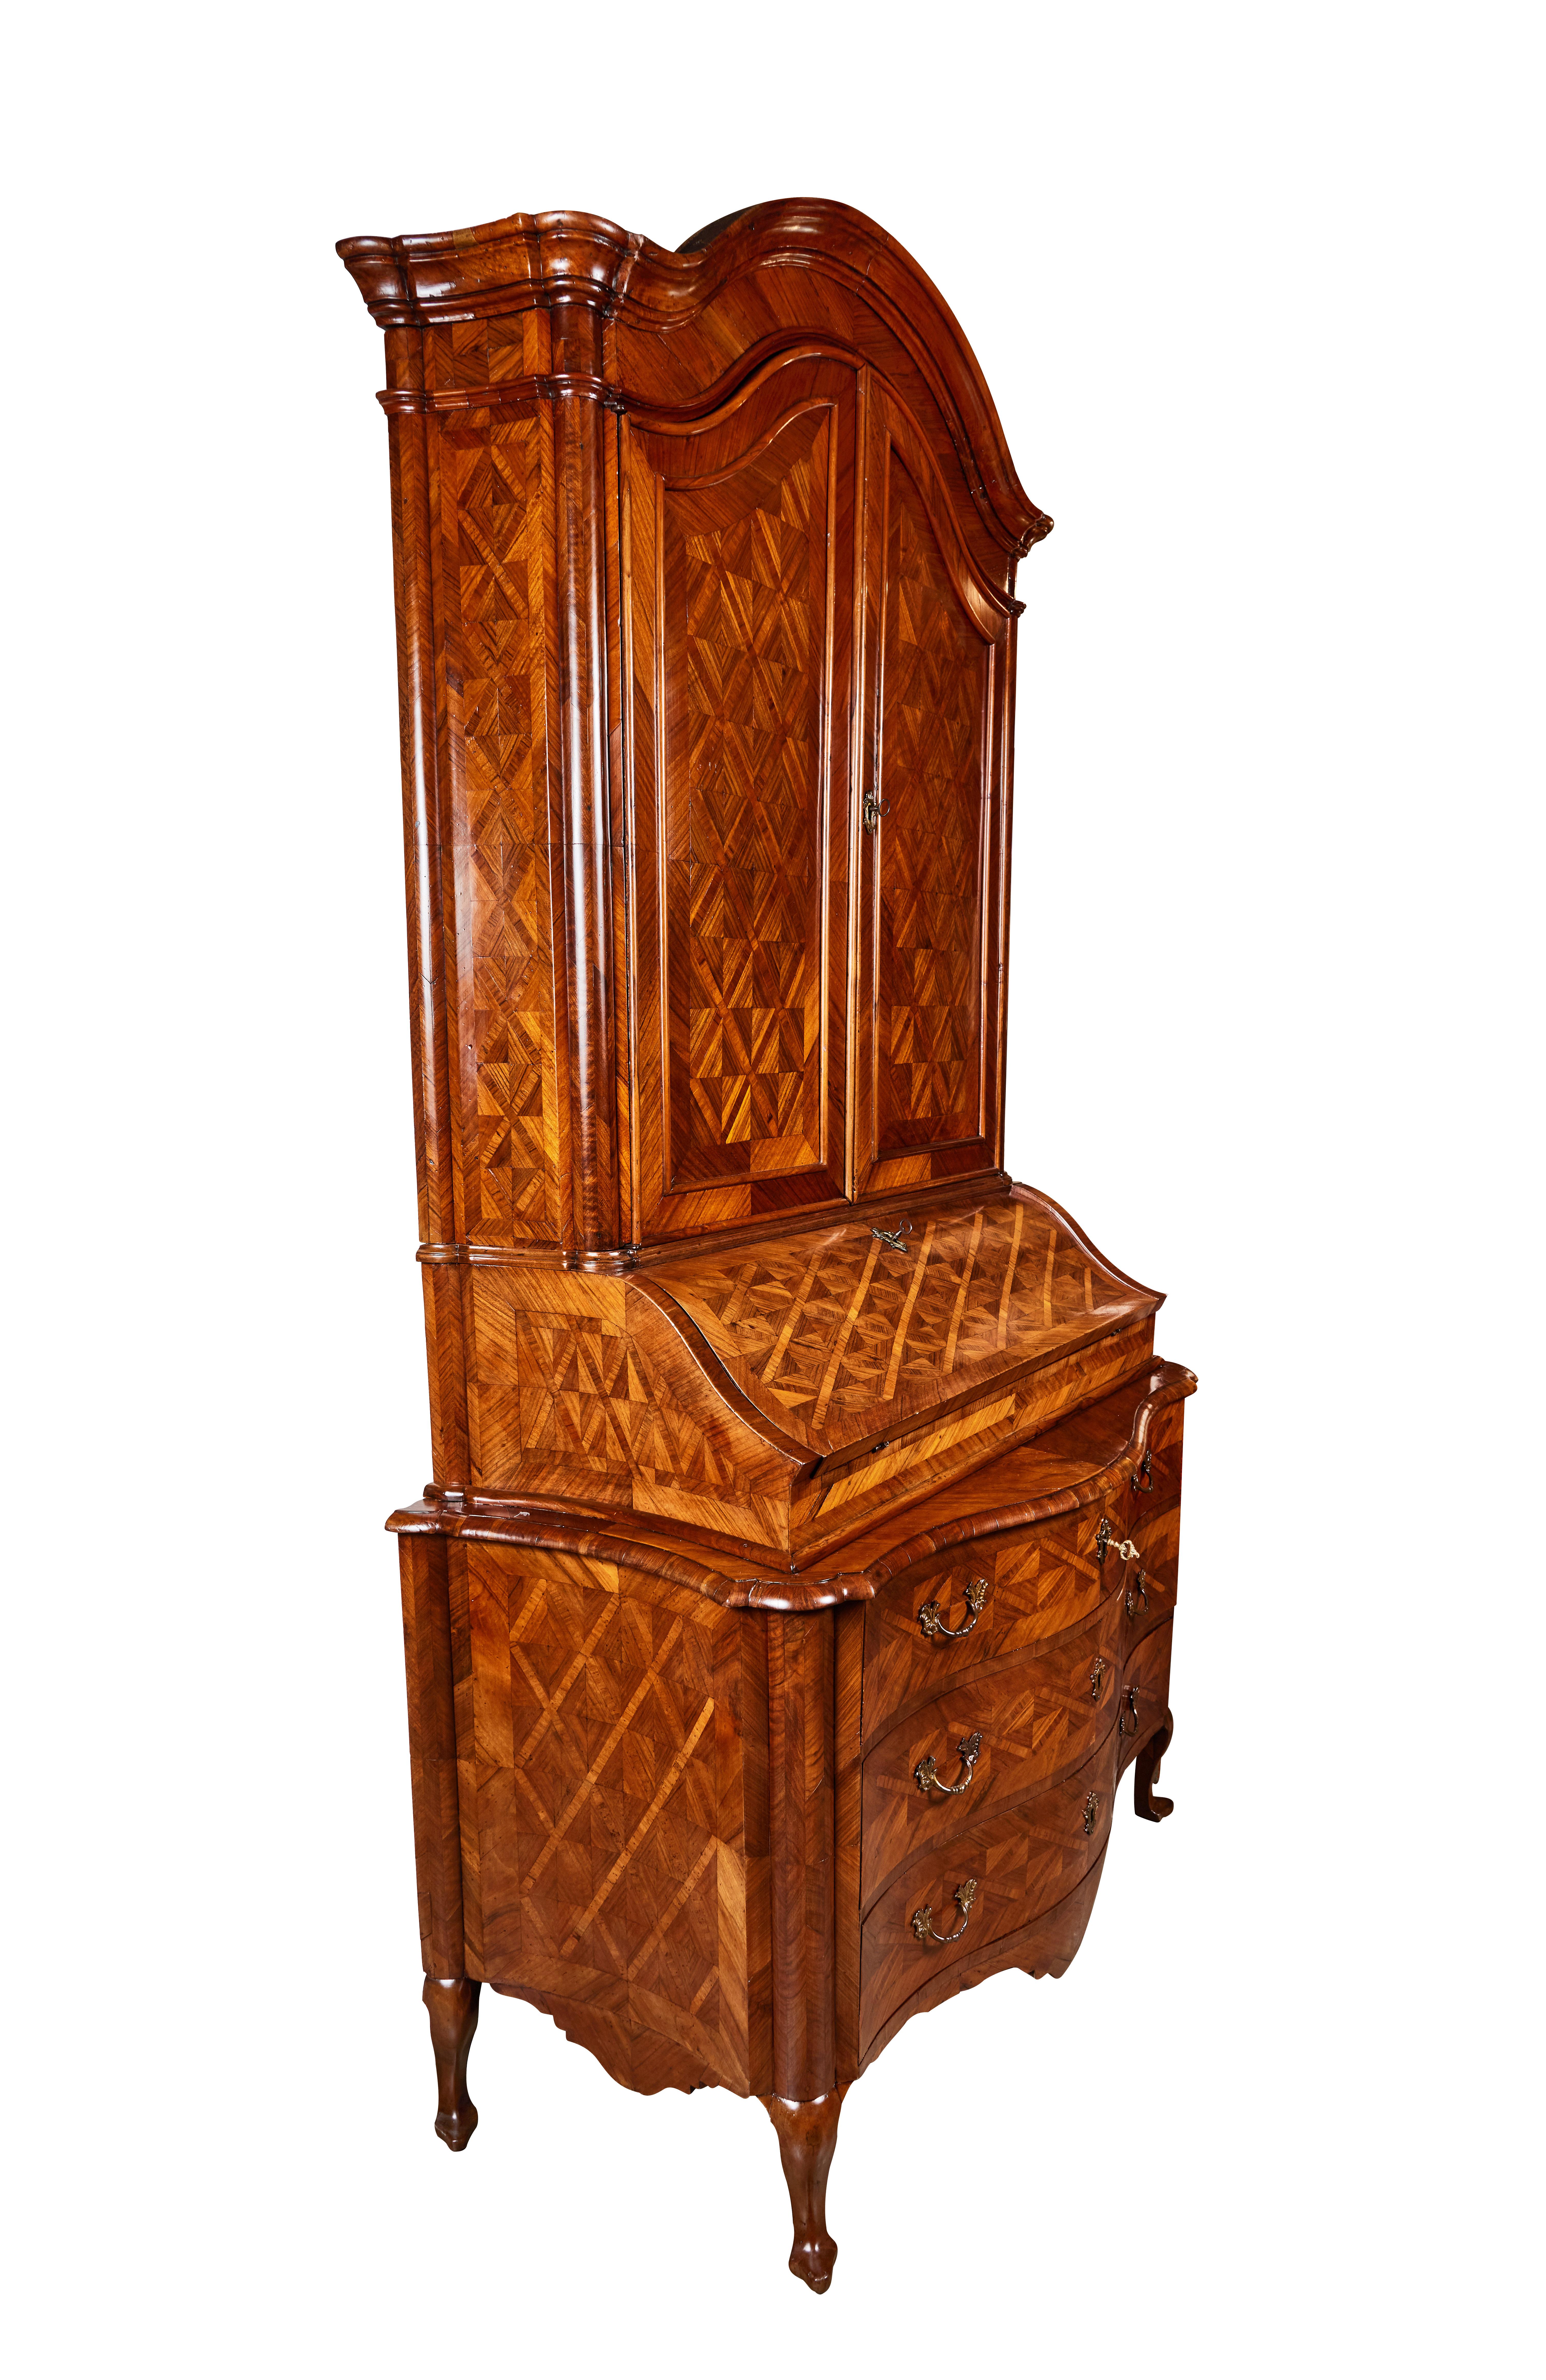 Stunning, hand carved, 18th century, parquetry inlaid and veneered, bonnet top, two-part secretary from the Emilia-Romagna region of Northern Italy. The two-door top cabinet sits above a serpentine, bow-front base featuring a scrolling apron, and